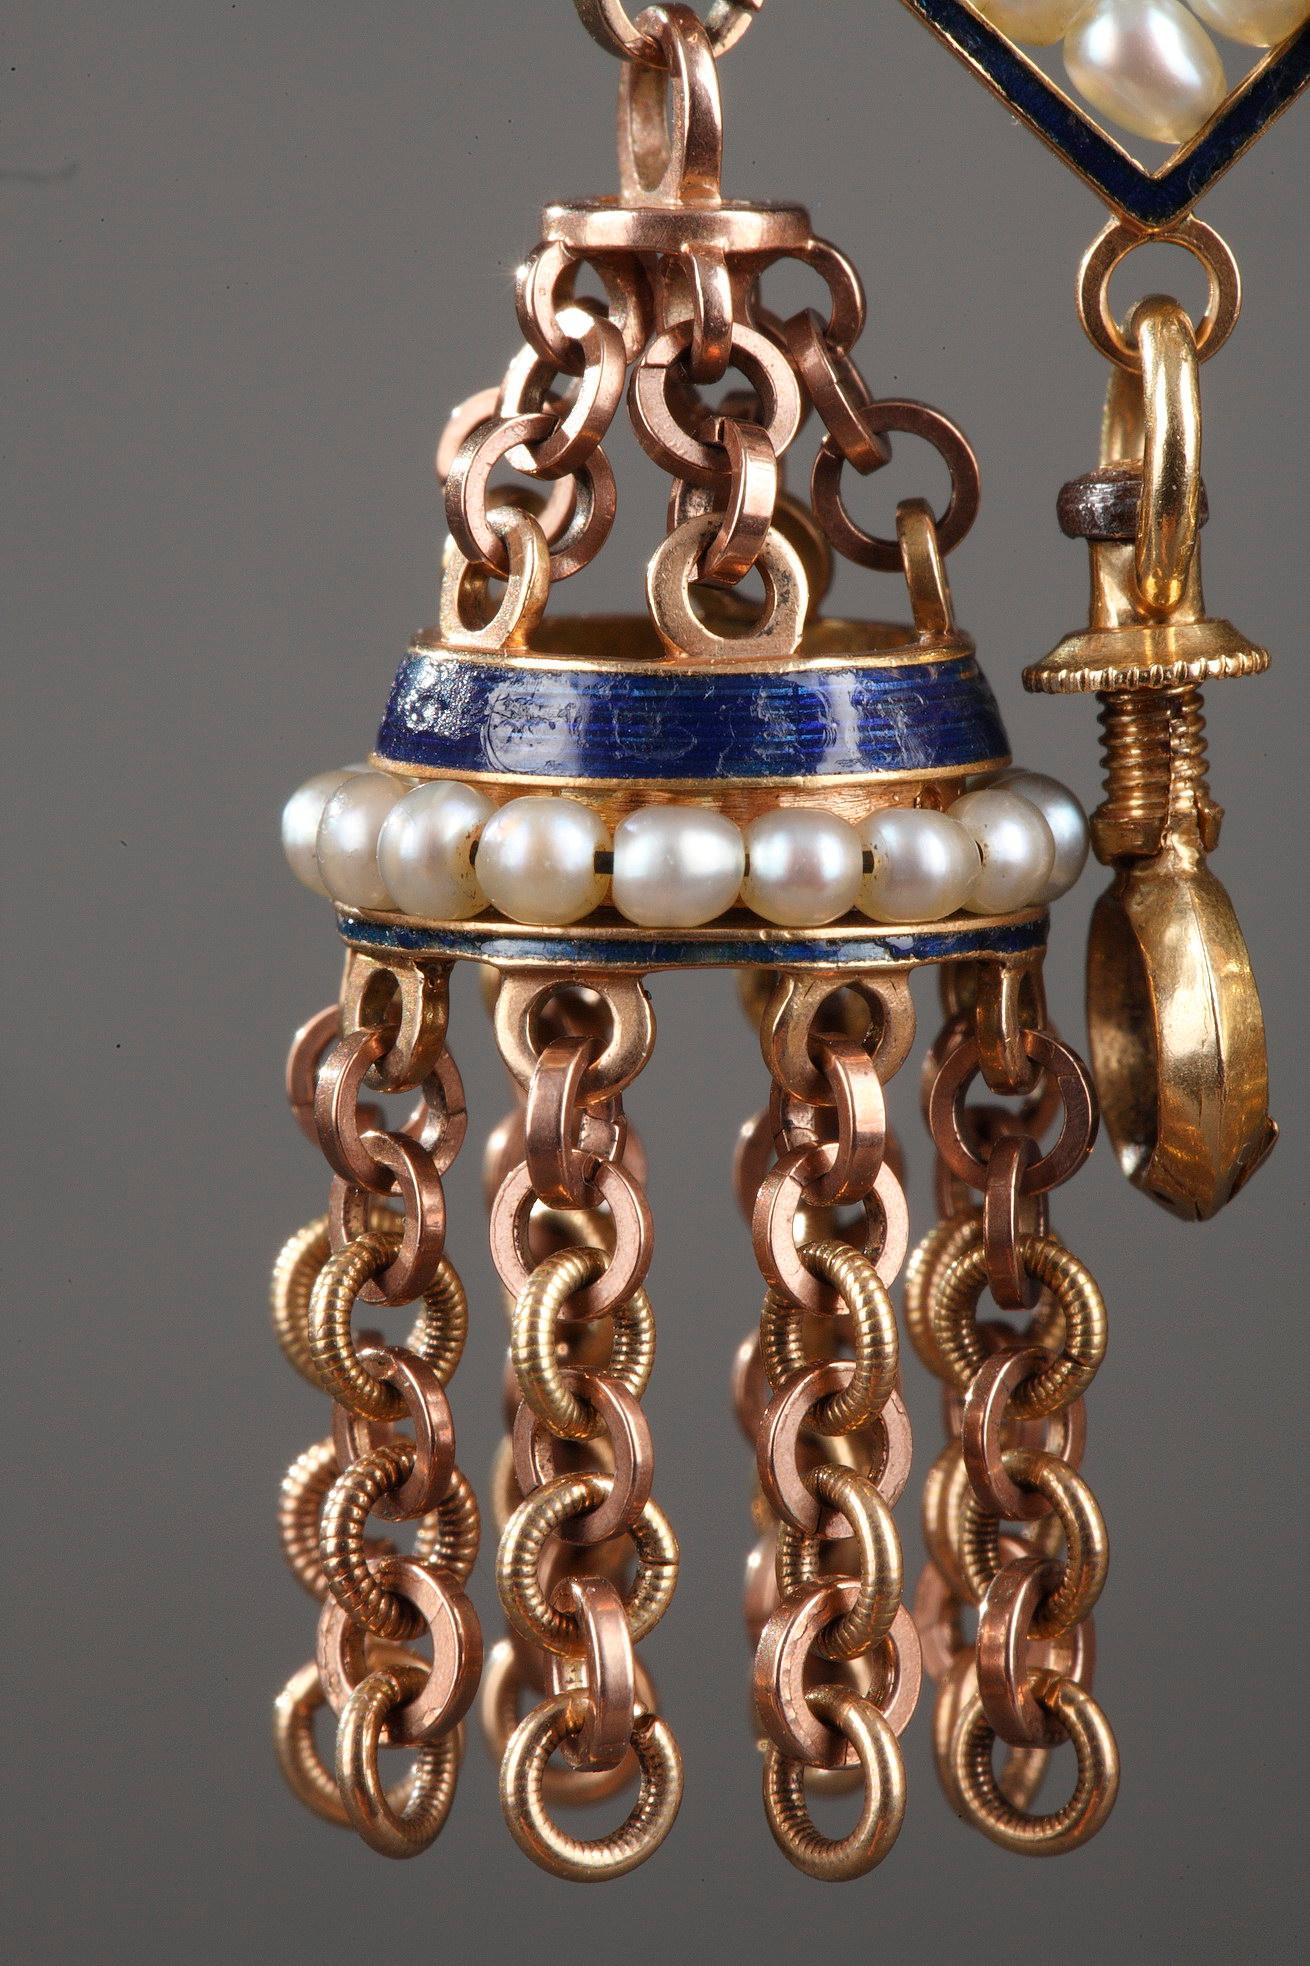 Chatelaine with Gold, Enamel and Pearls, Late 18th Century Work For Sale 4